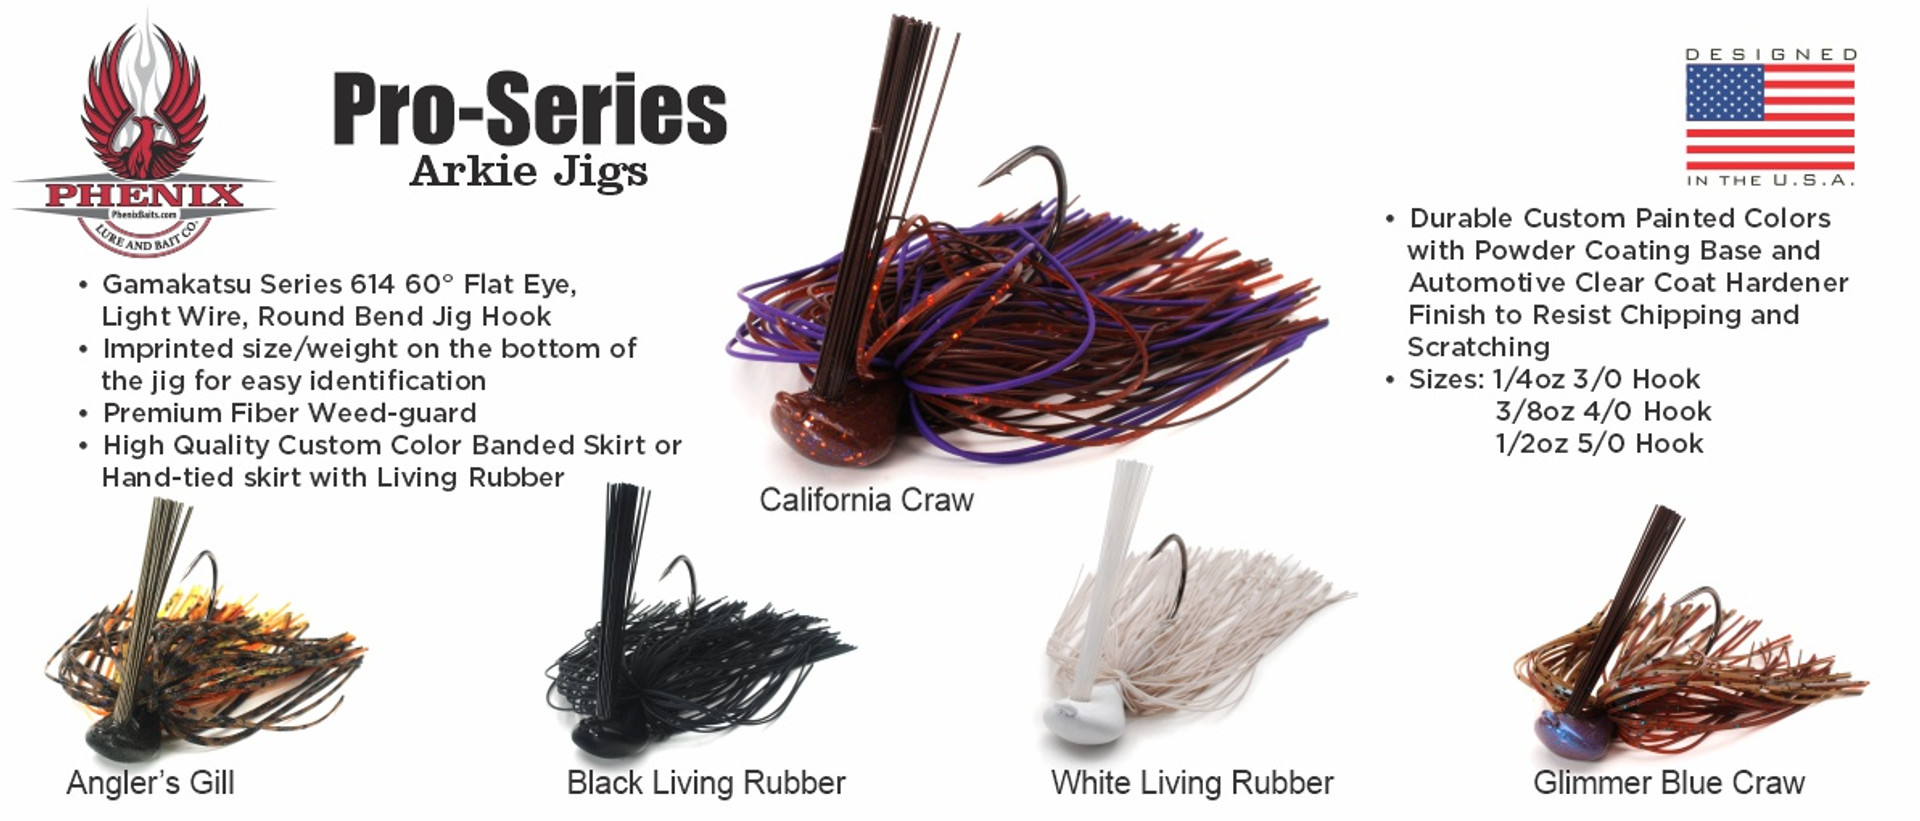 Phenix Pro-Series Flipping Jig - Peanut Butter and Jelly 